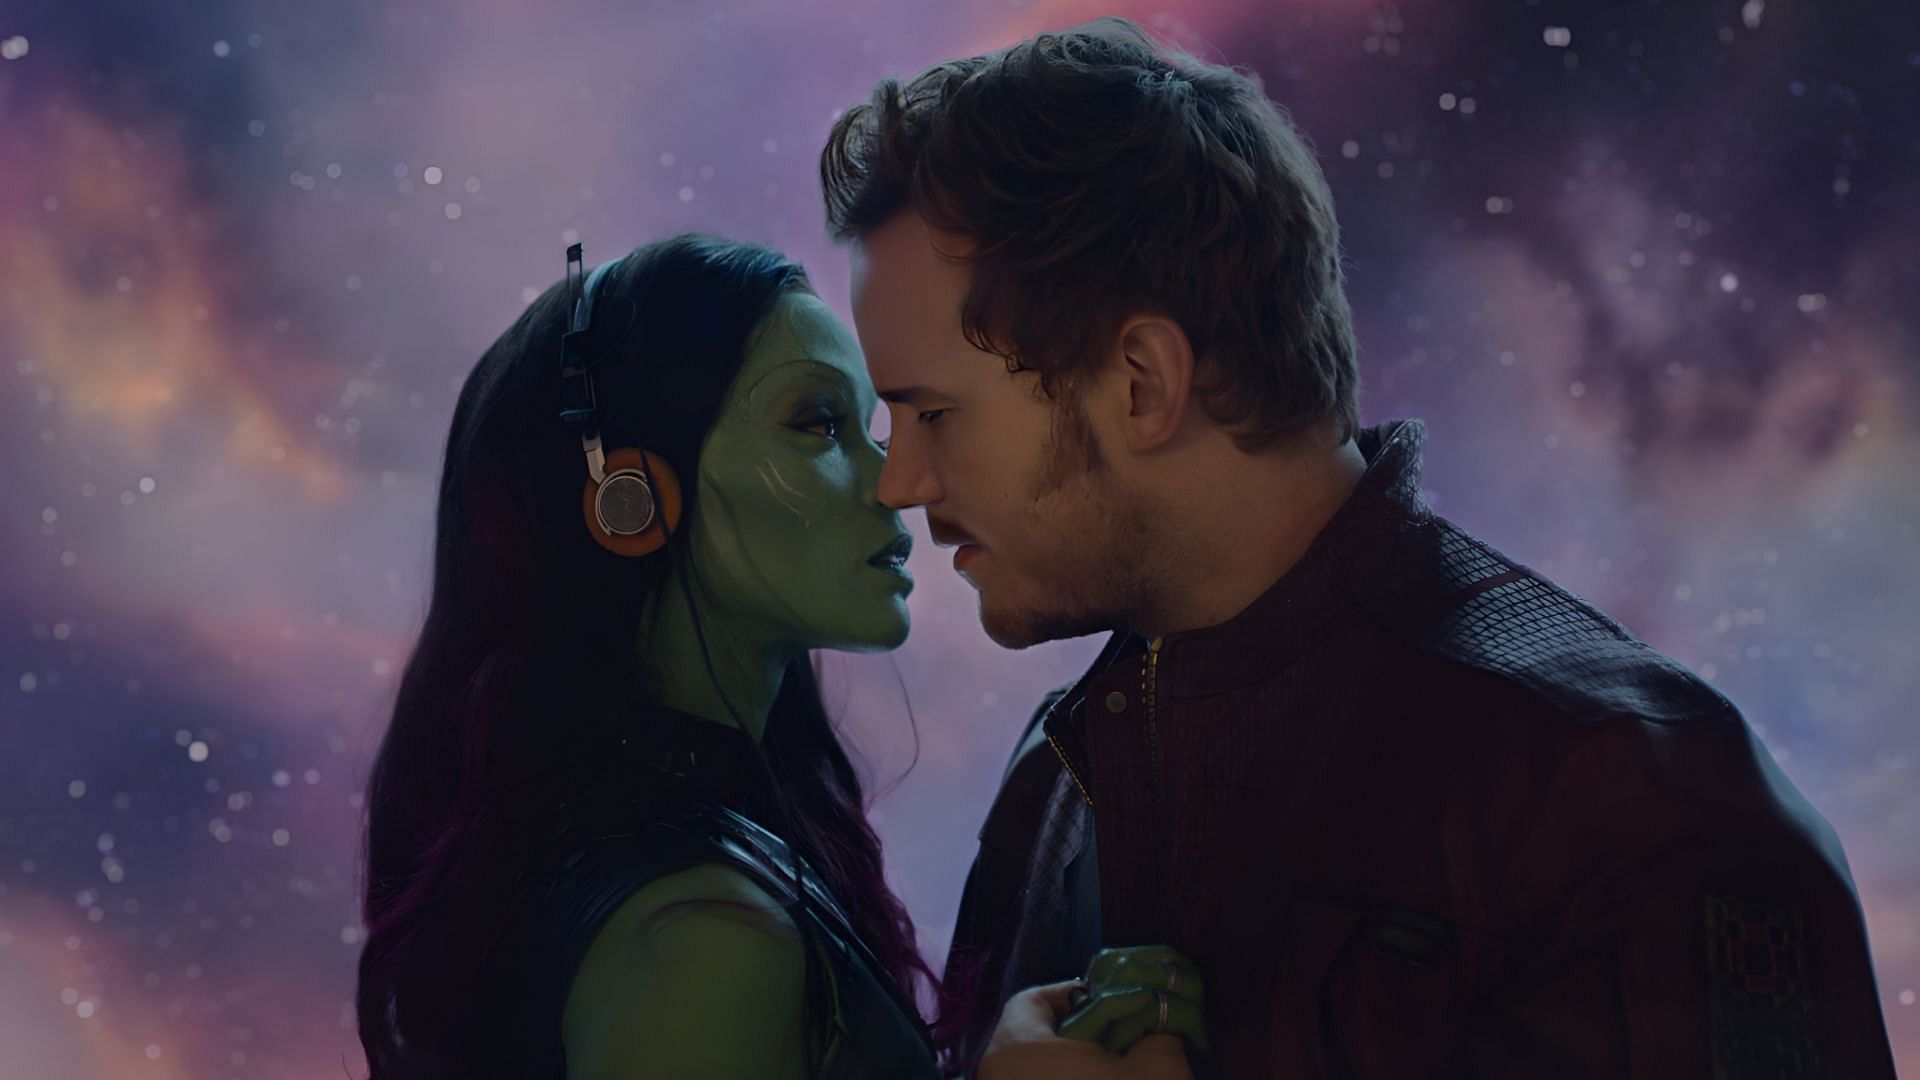 Star-Lord and Gamora shared one of the most distinct and unusual romances in the Marvel Cinematic Universe. (Image via Marvel)